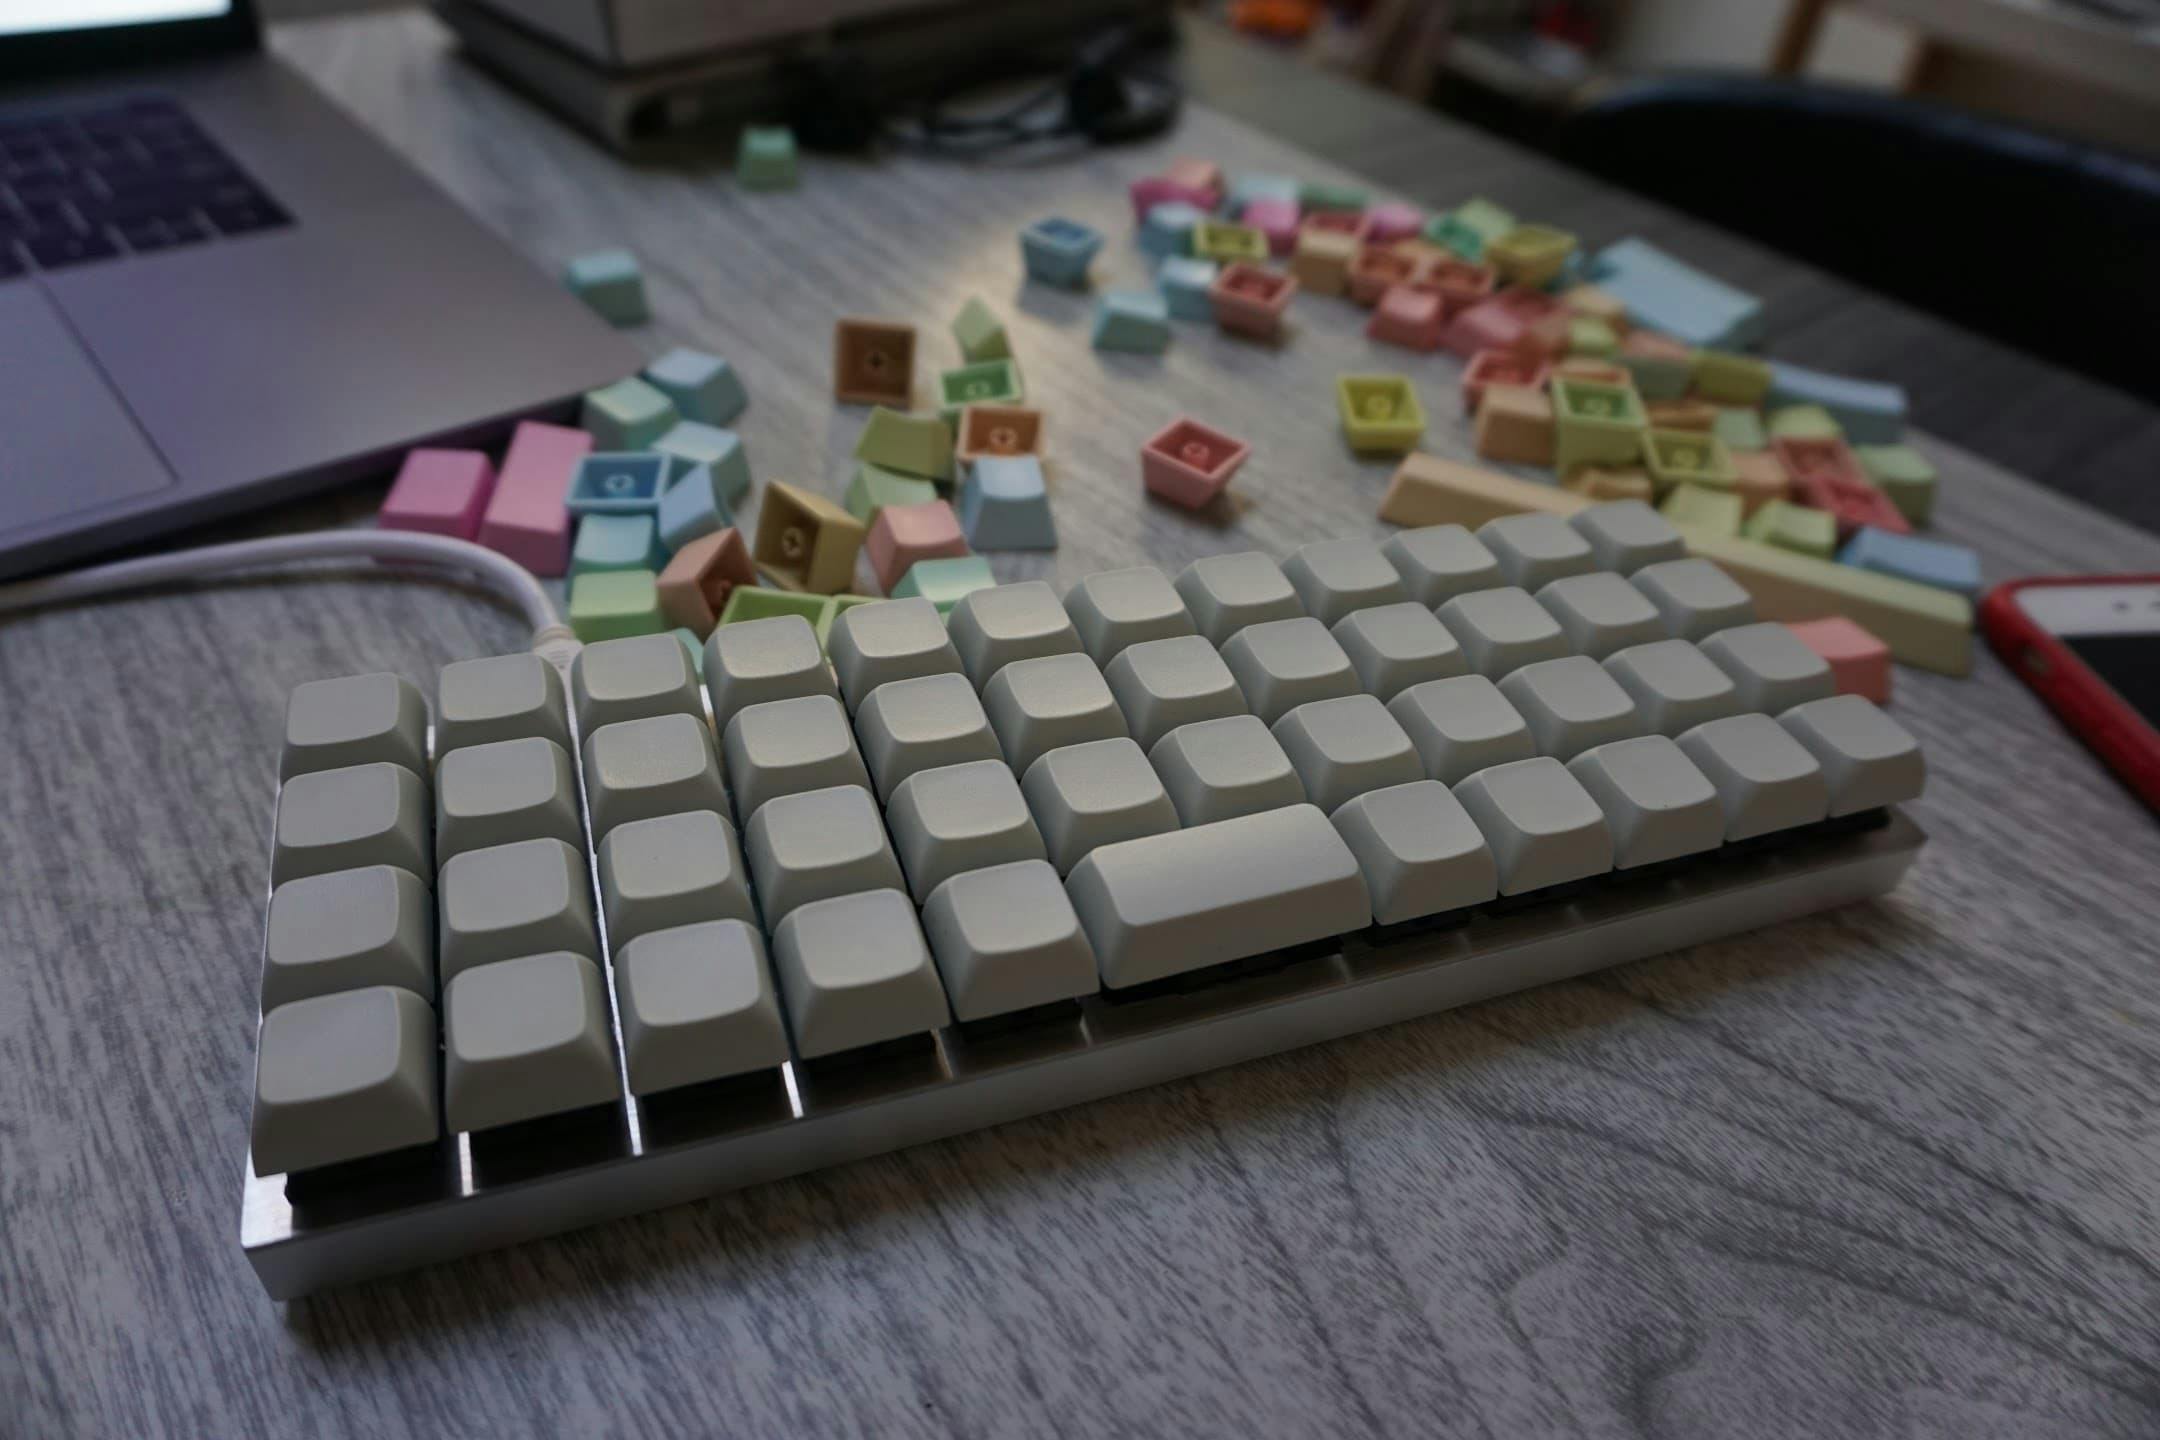 My second keyboard, a Planck OLKB, with beige XDA PBT blank keycaps which have a uniform profile